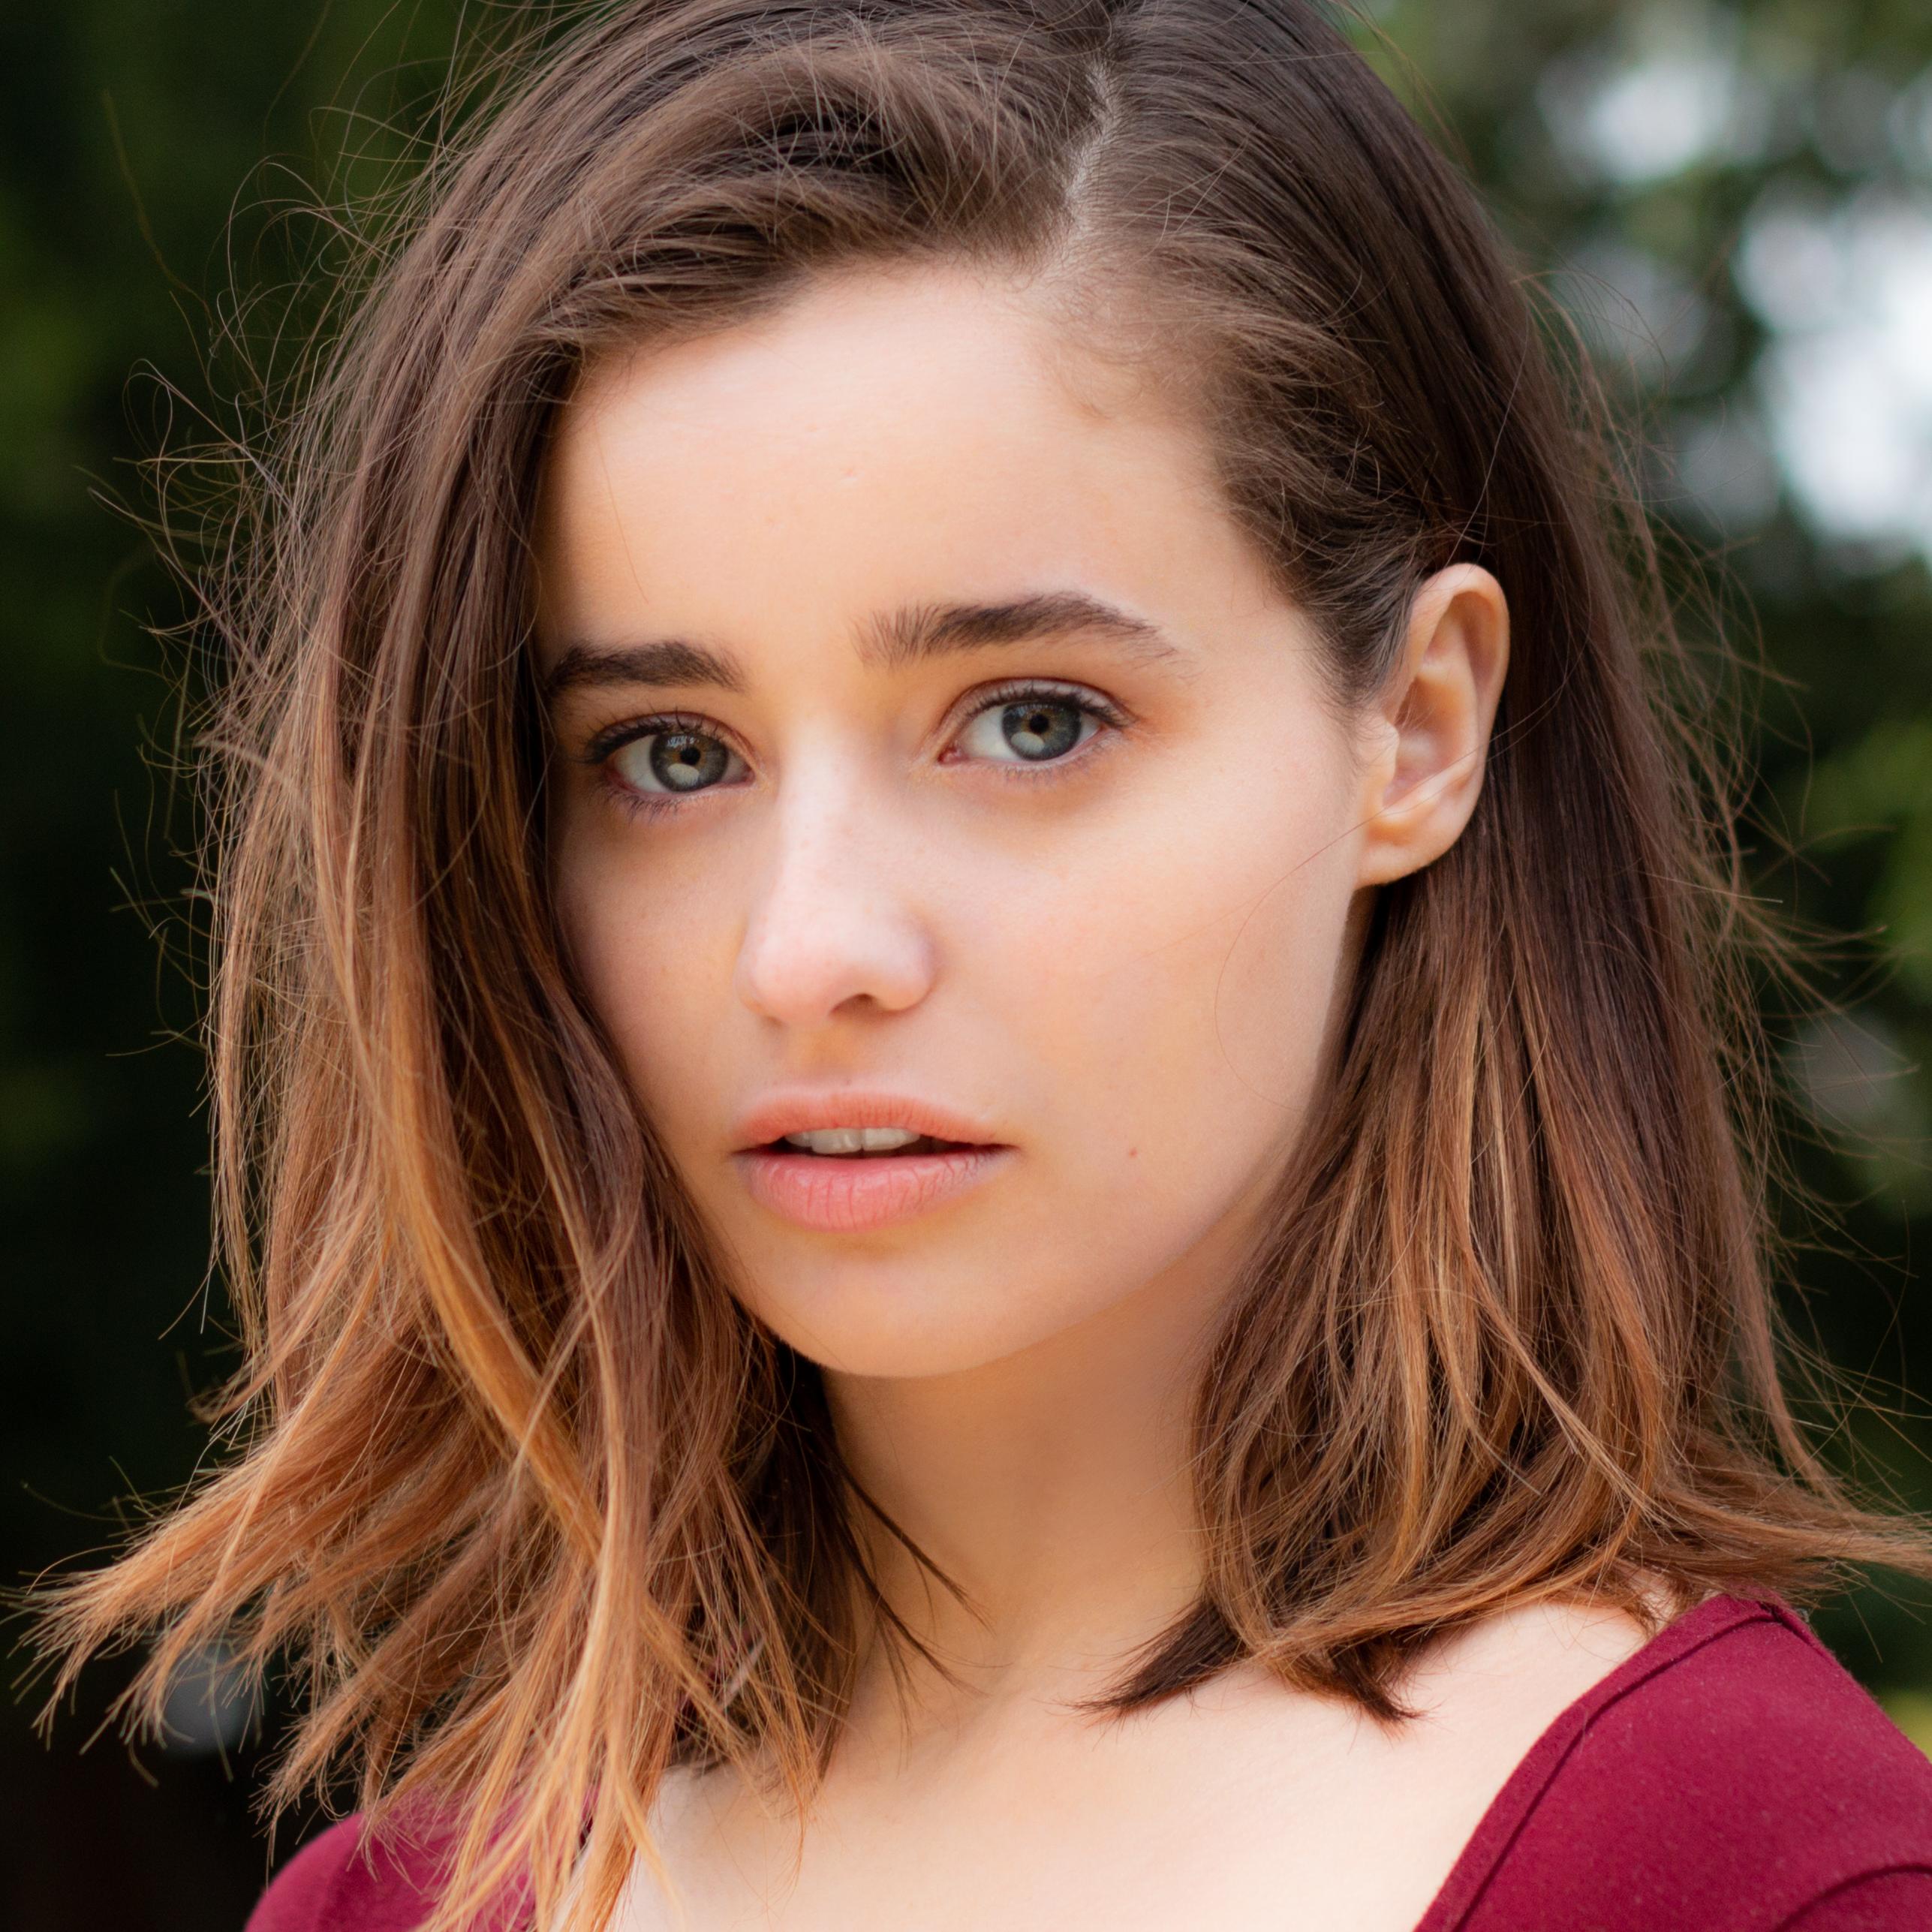 Holly earl humans